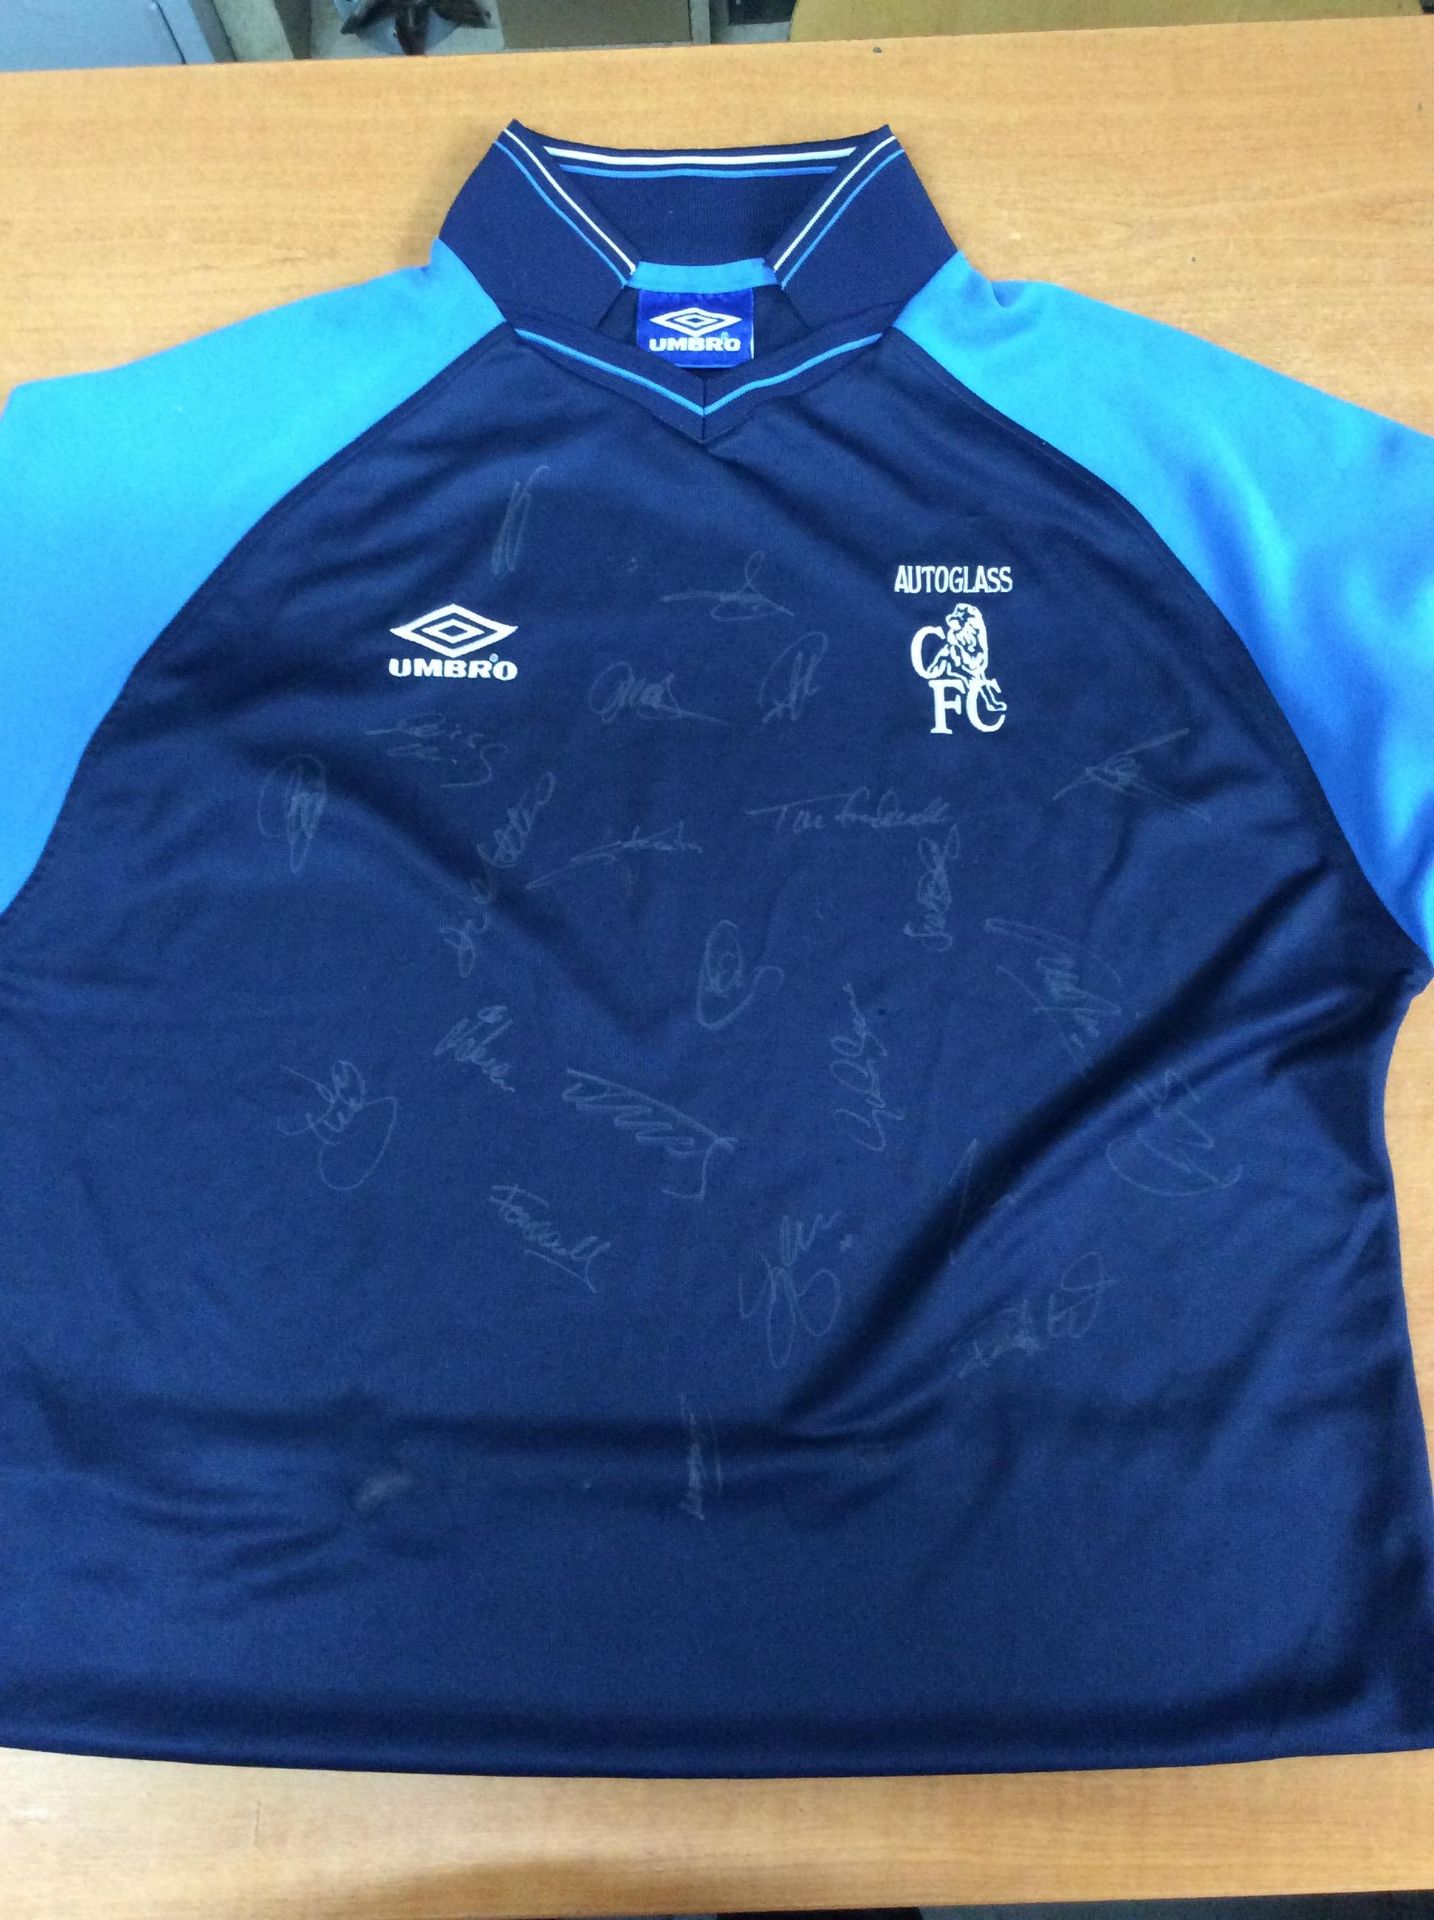 Chelsea Signed Football Shirt - Image 3 of 3